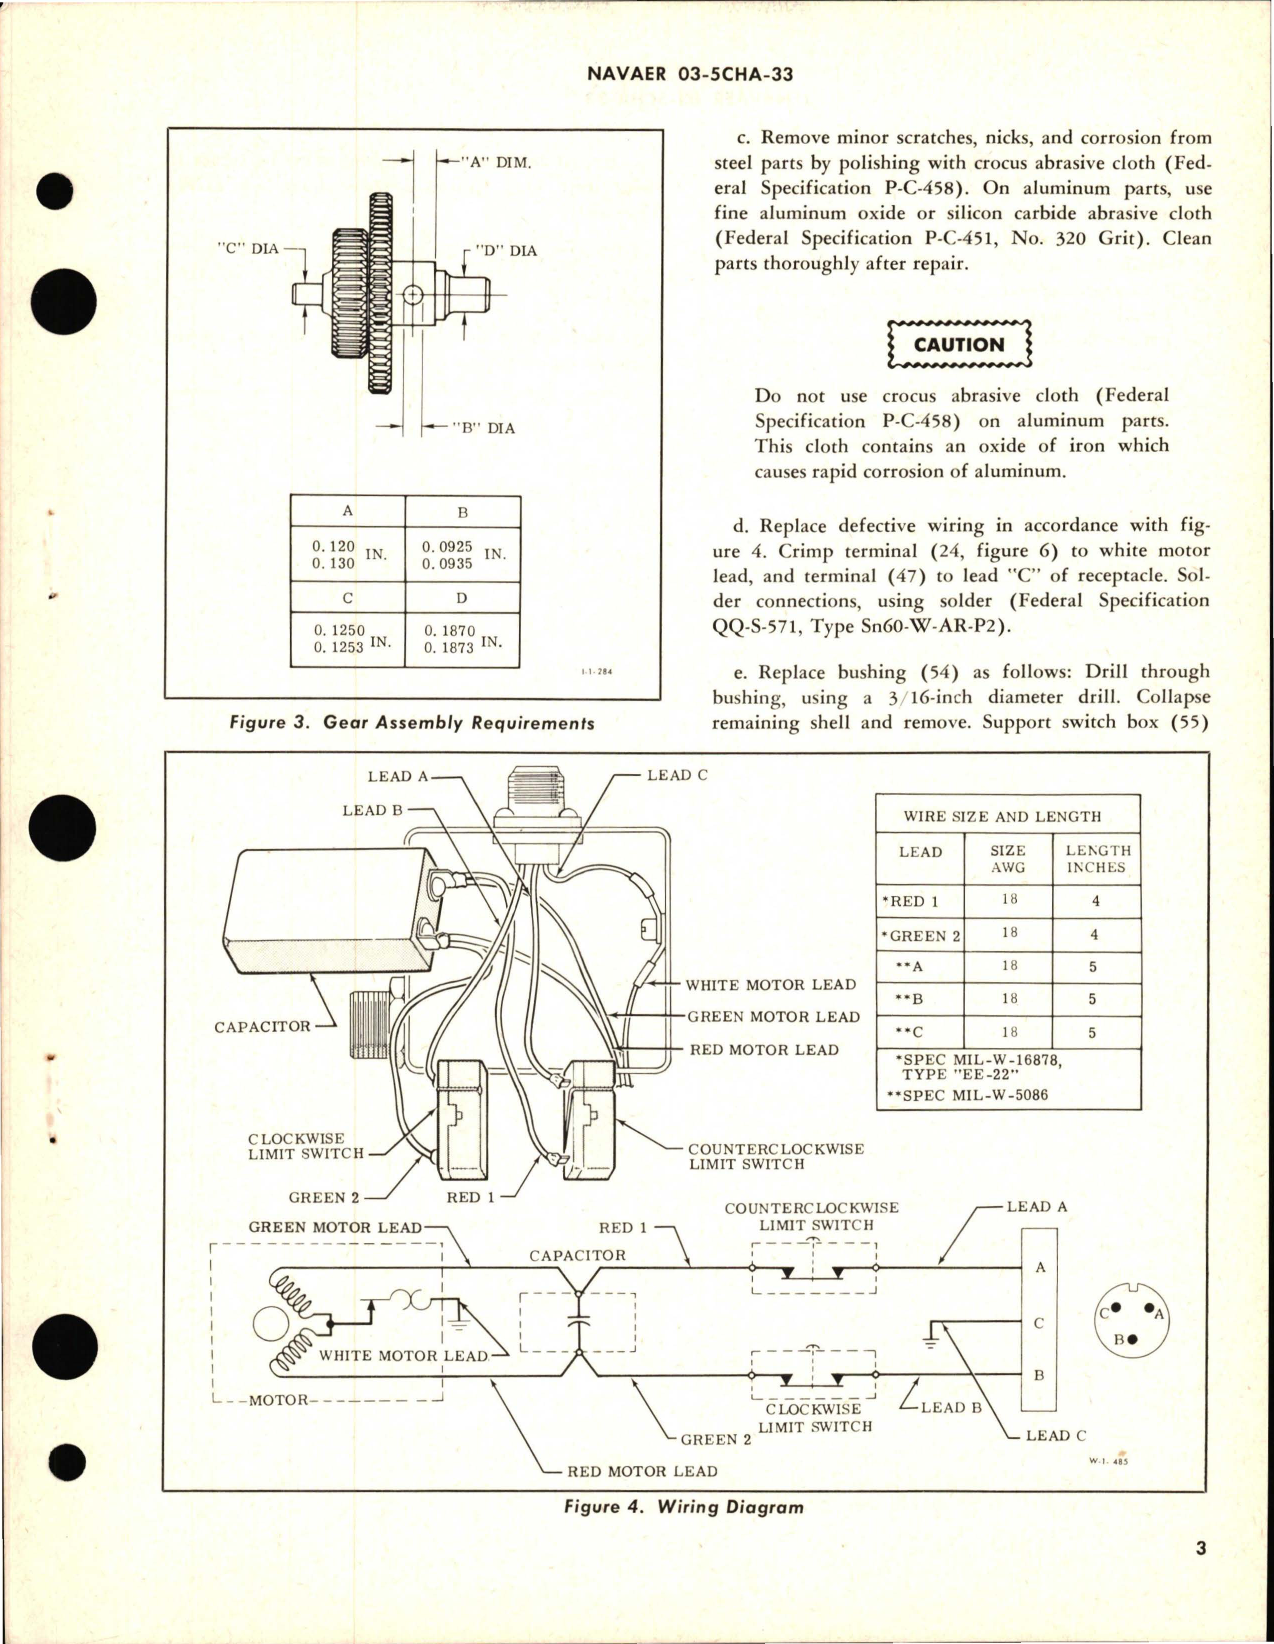 Sample page 5 from AirCorps Library document: Overhaul Instructions with Parts Breakdown for Electromechanical Rotary Actuator - Part 525054